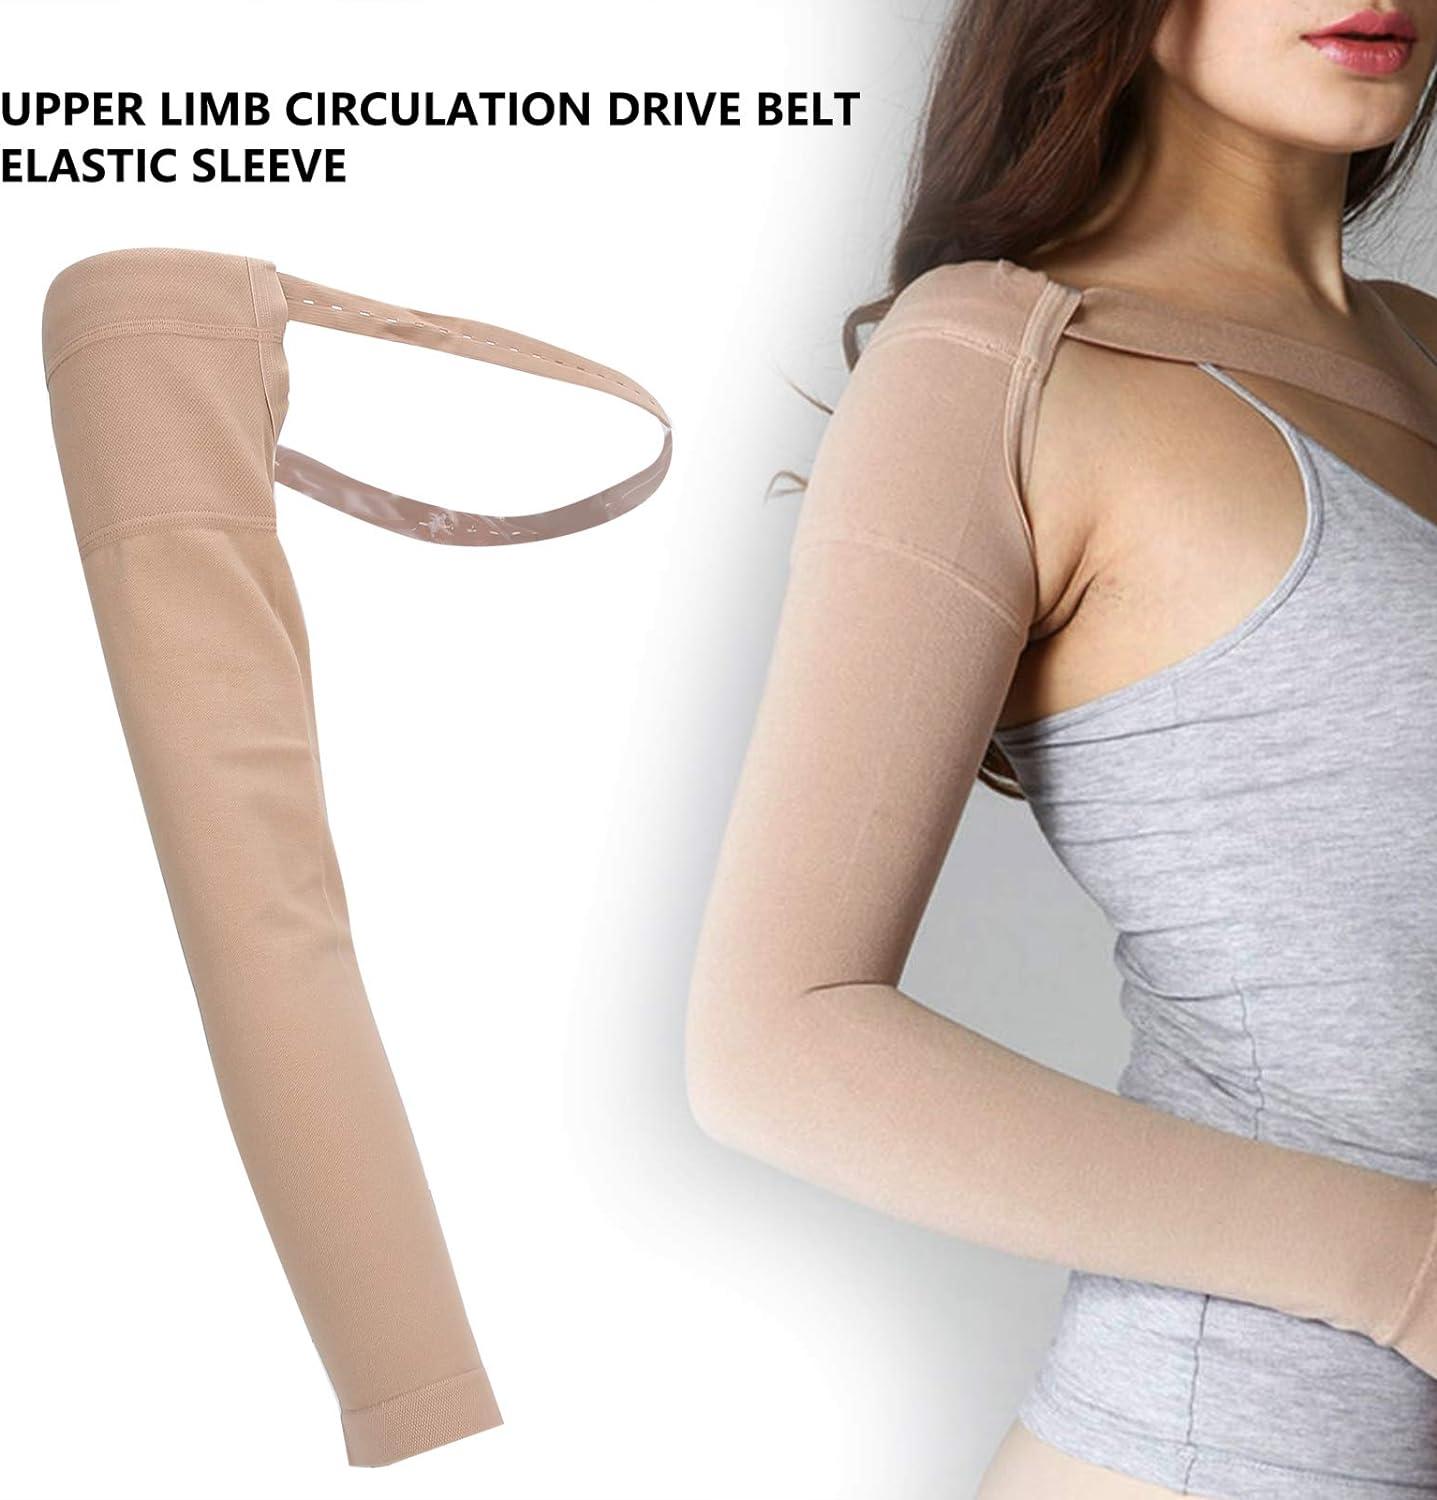 Post Mastectomy Compression Sleeve Elastic Lymphedema Sleeve Arm Swelling Arm  Lymphedema Edema Arm Support Brace for Preventing Arm Lymphedema and Other  Symptoms(XXL)